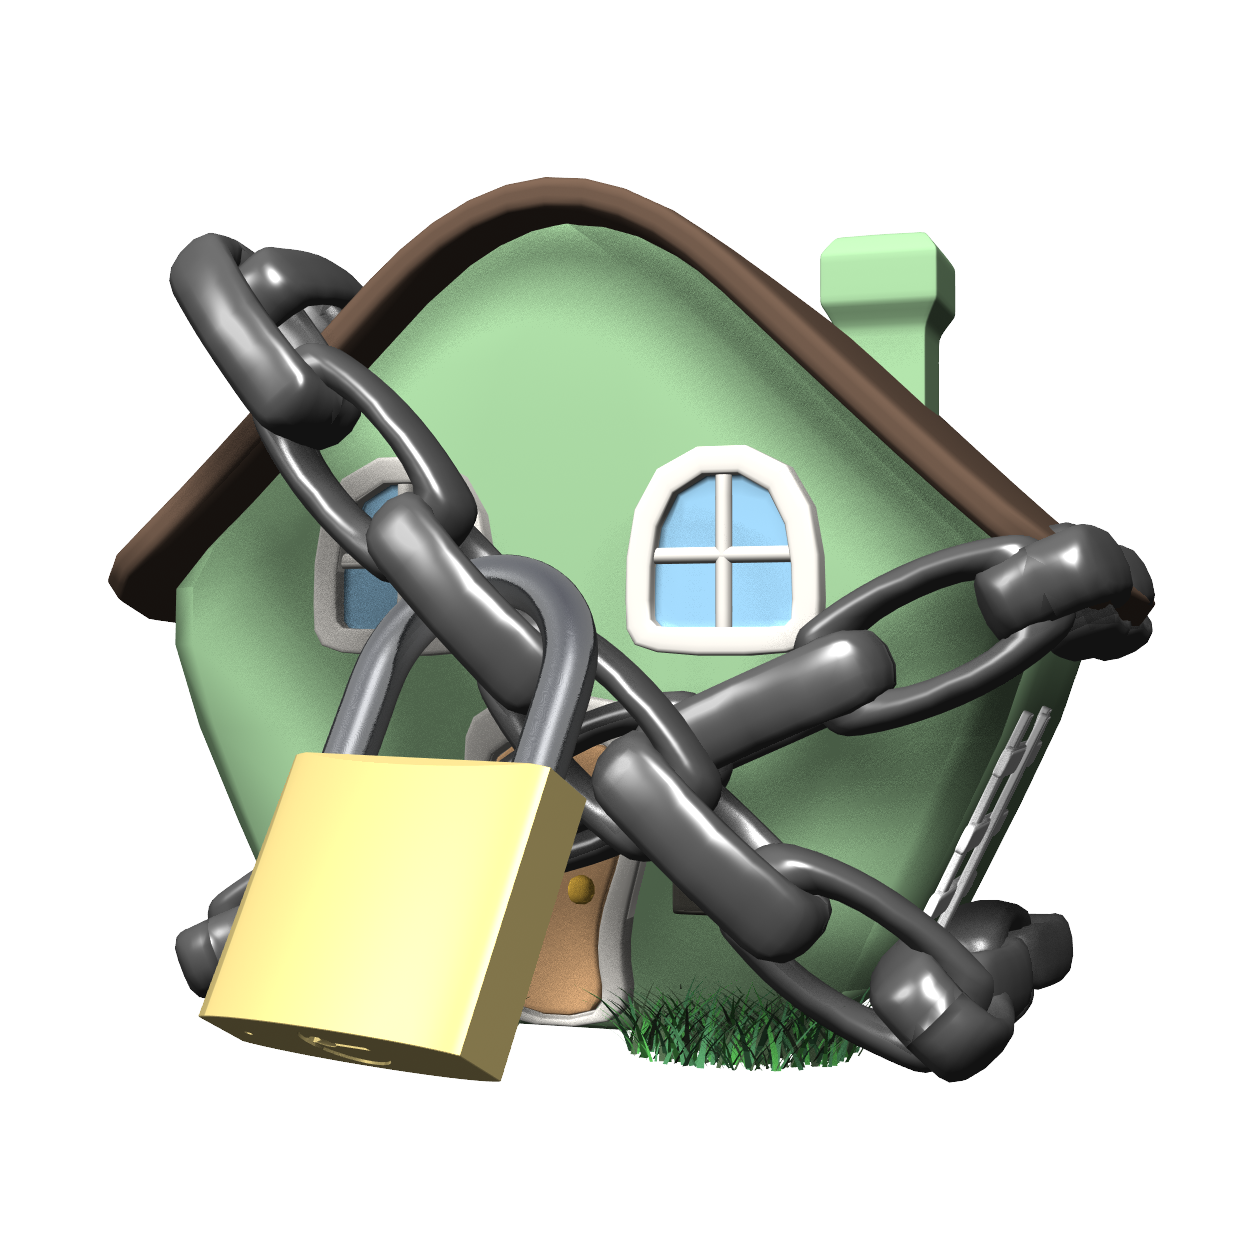 security system clipart - photo #36